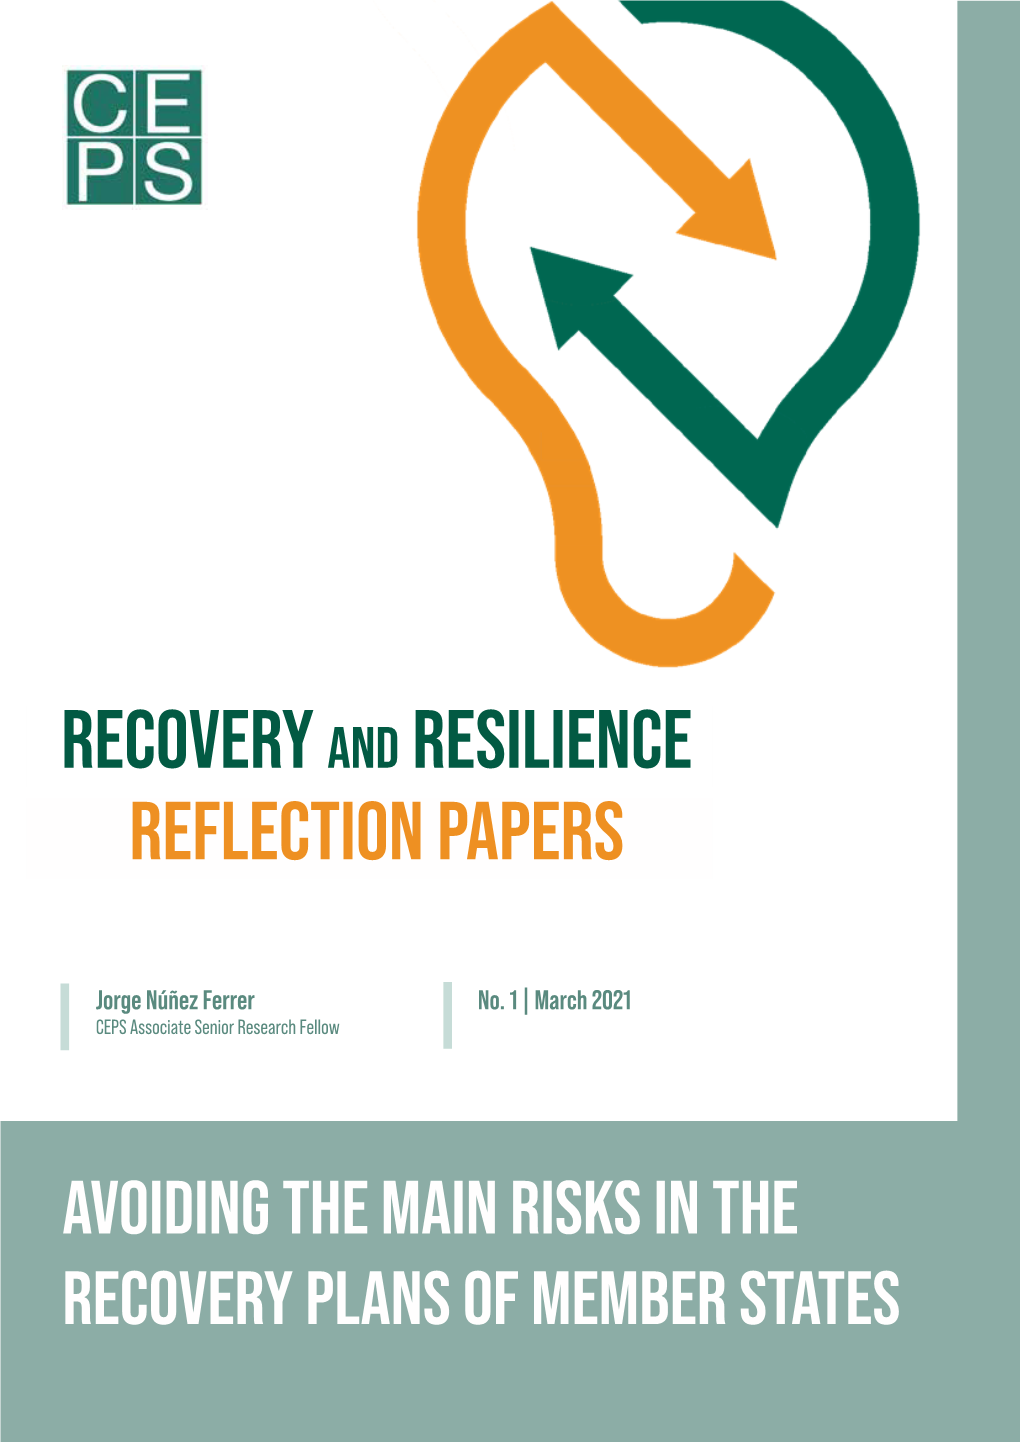 RECOVERY and RESILIENCE REFLECTION PAPERS